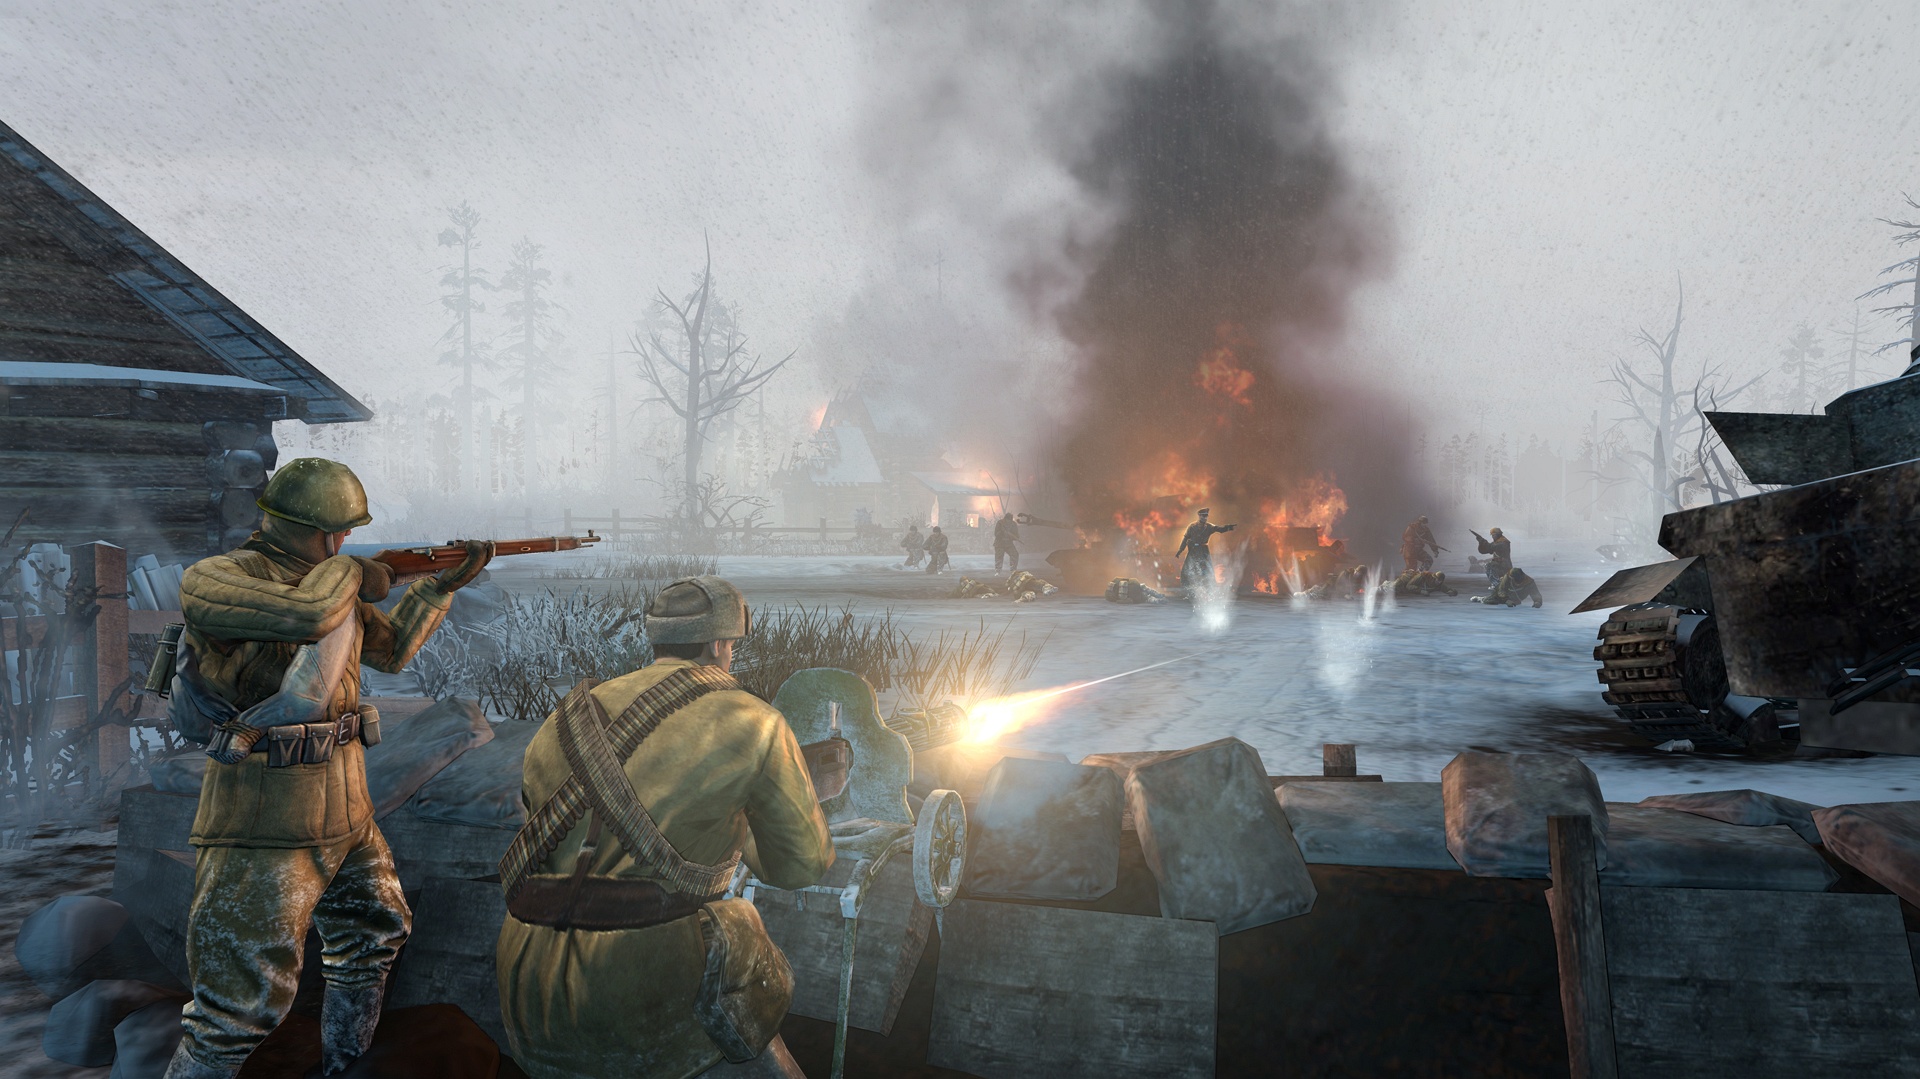 Company of heroes dlc. Company of Heroes 2 СССР. Company of Heroes 2 компании. Company of Heroes 2 (coh2). COH 2 арт.